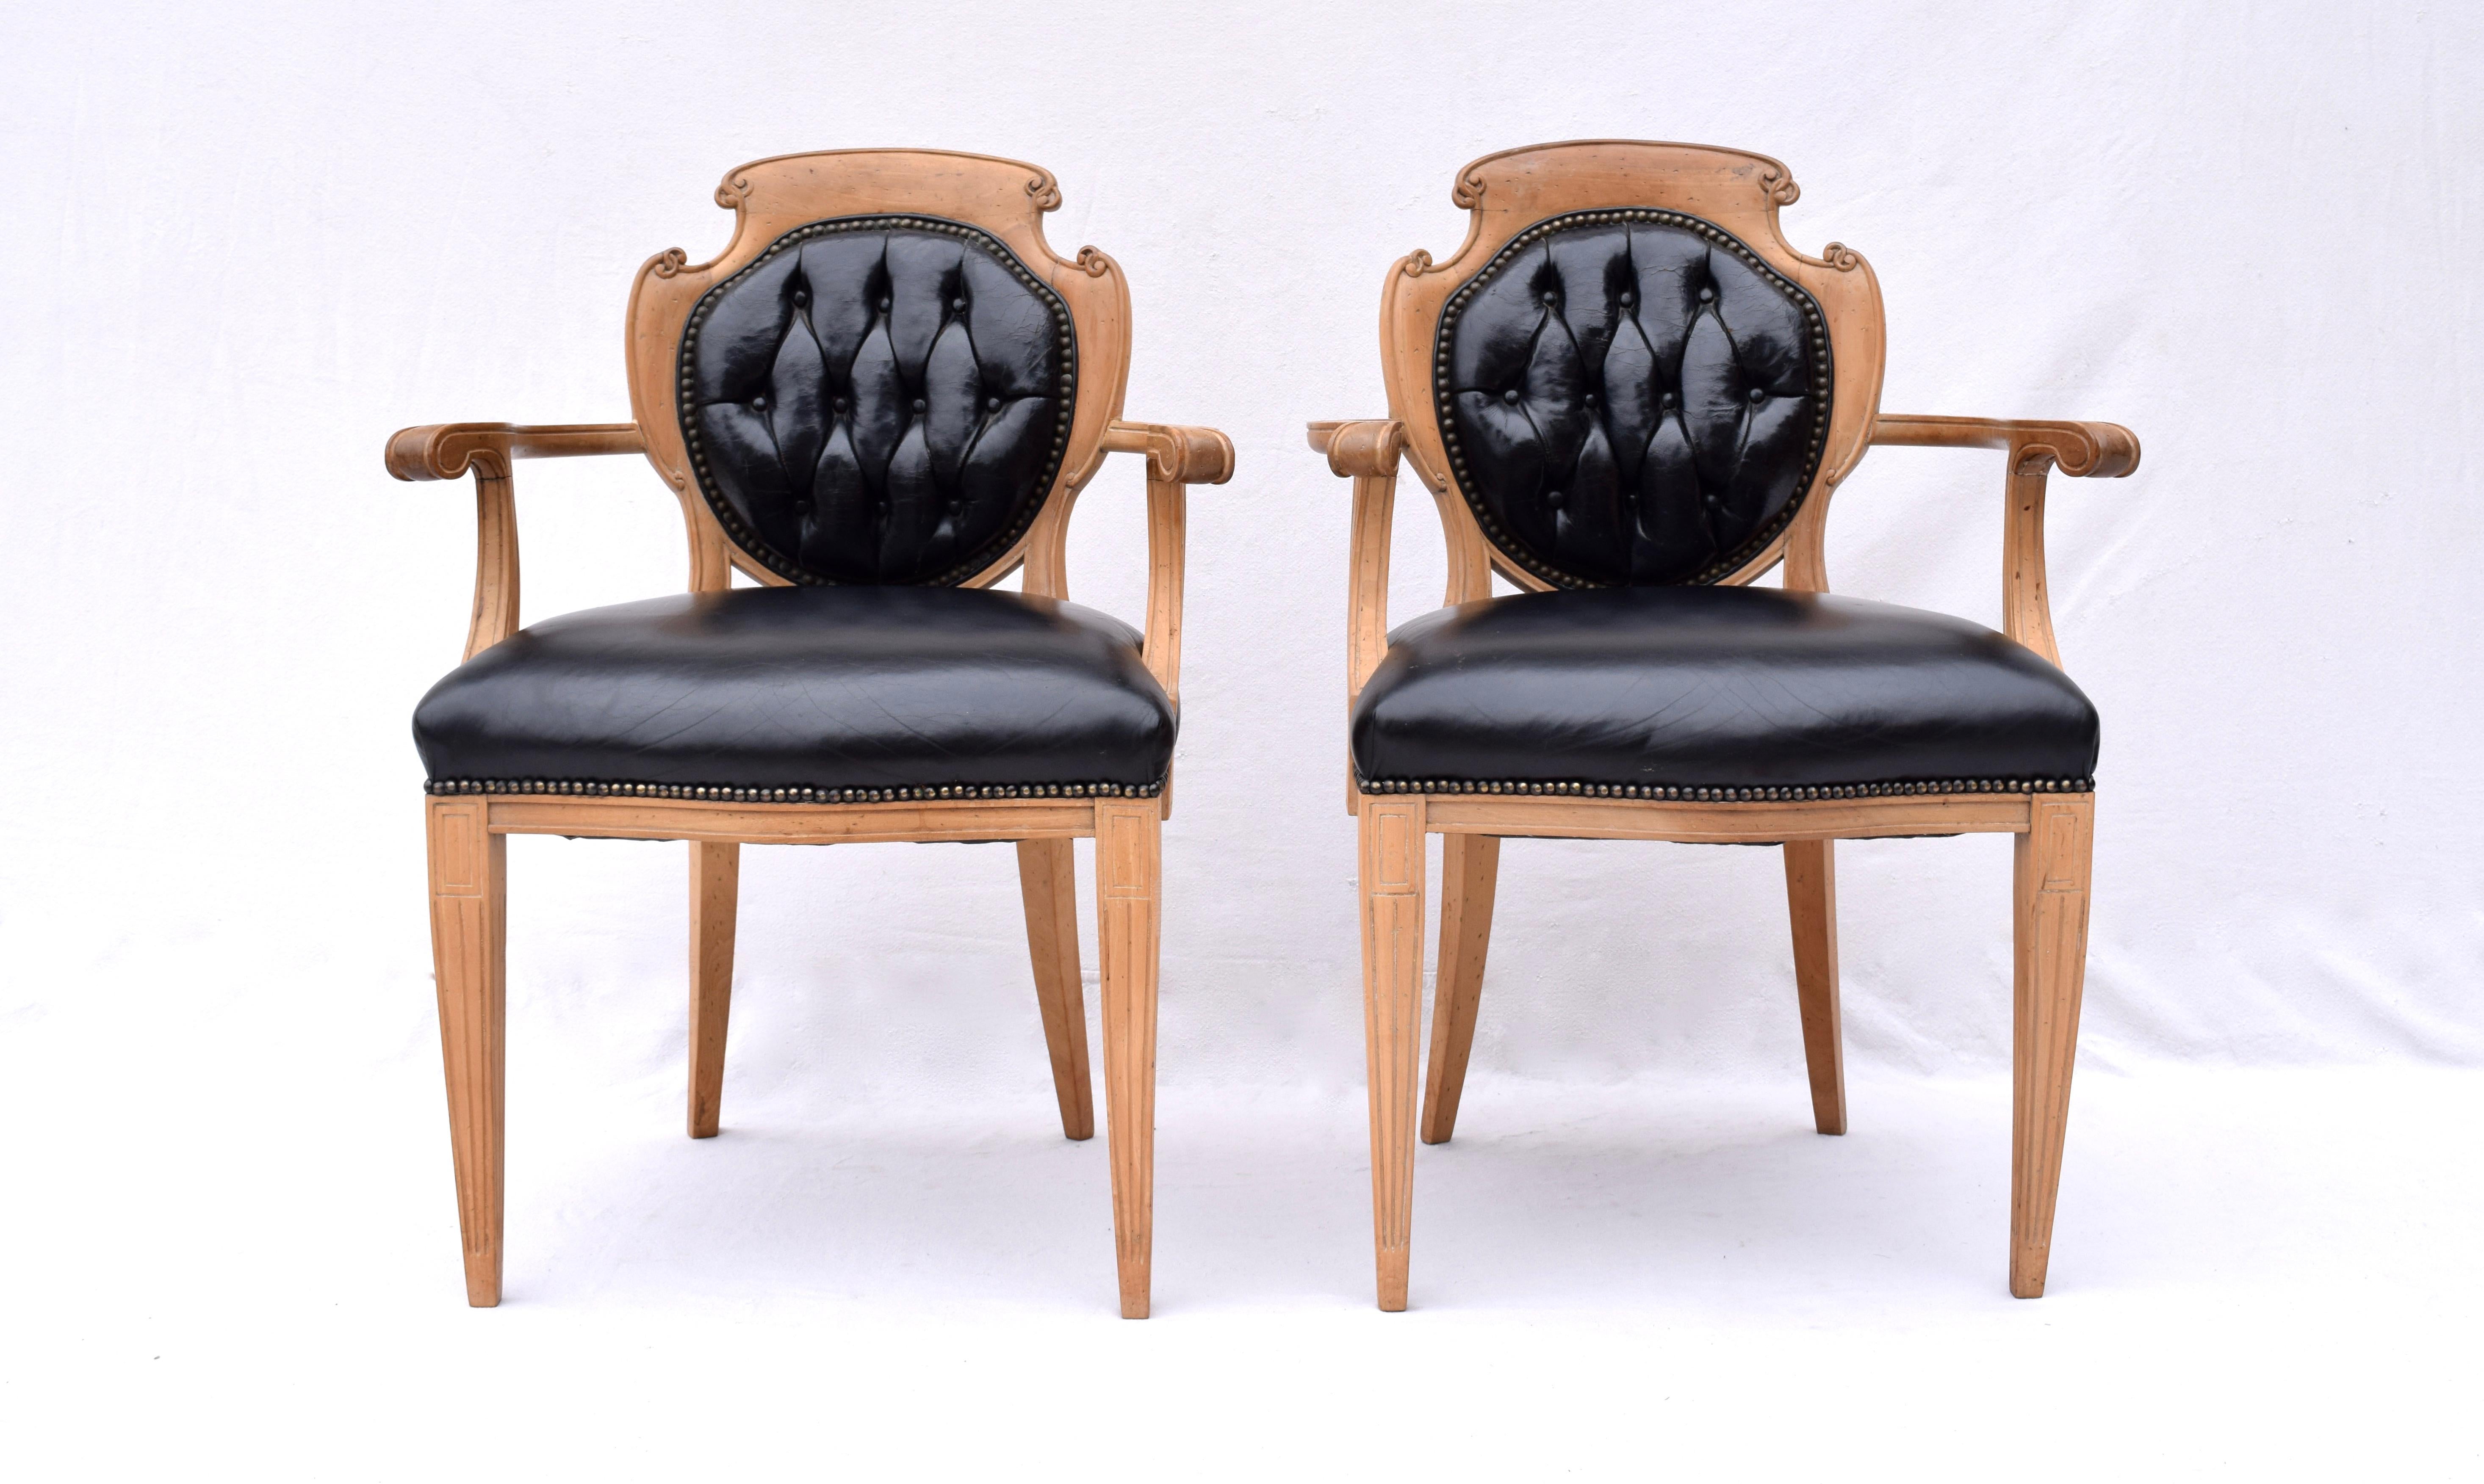 An exceptional and unique set of six English Regency style tufted leather and caned back dining chairs, circa 1950s. Excellent all original backs with replaced leather seats and brass tack nail heads reupholstered in the early 2000s.